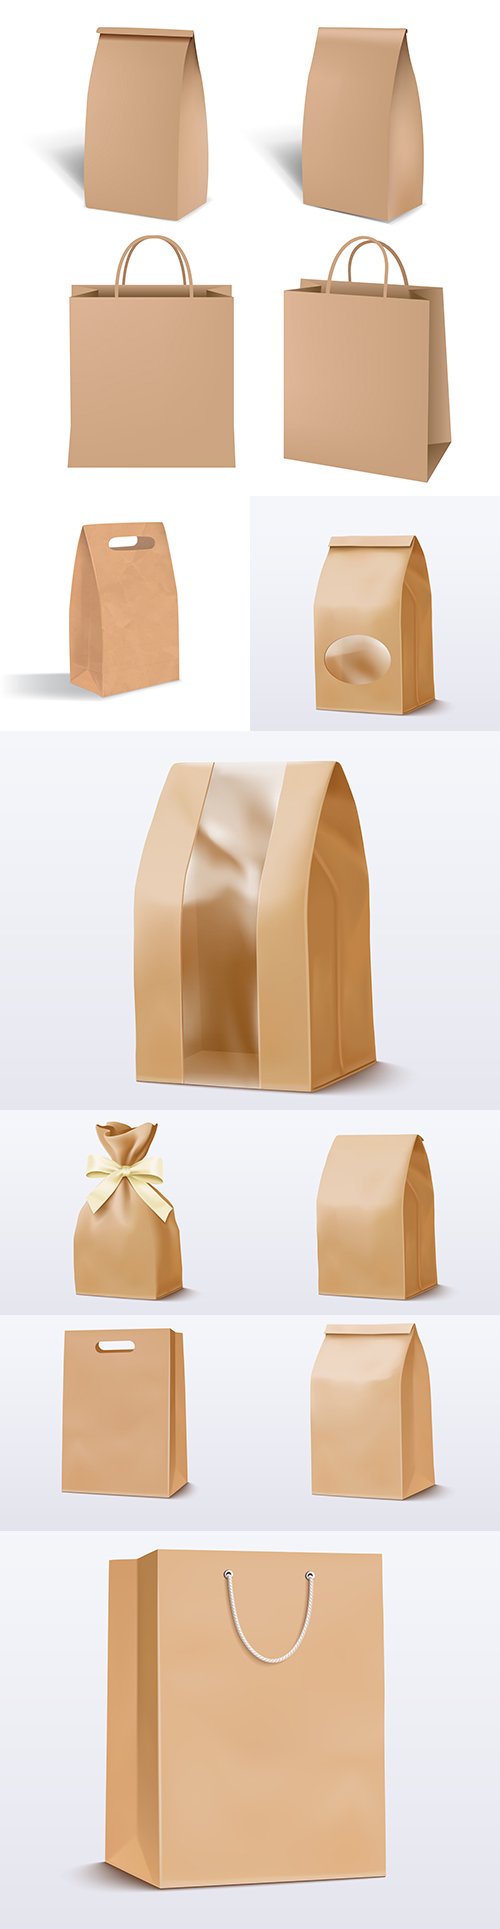 Paper brown bag for shopping package template illustration